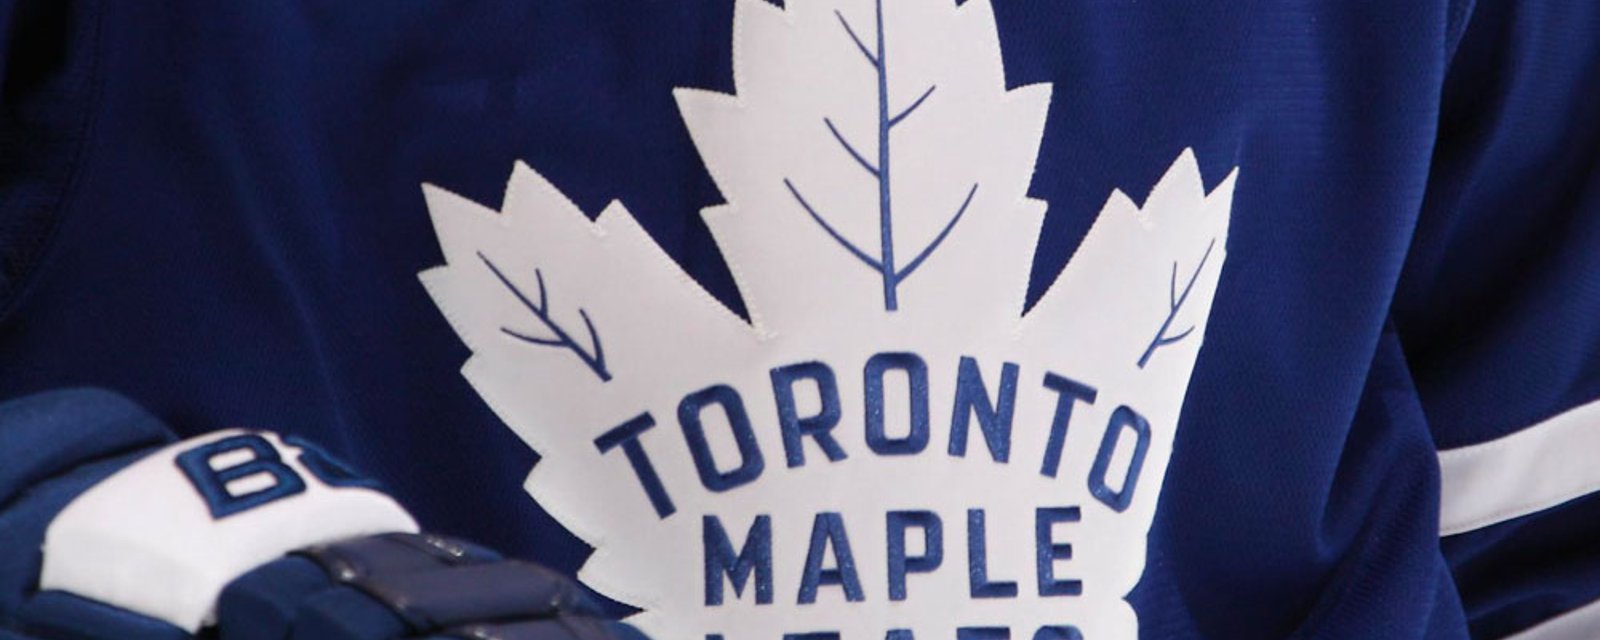 Report: Leafs are in tax trouble